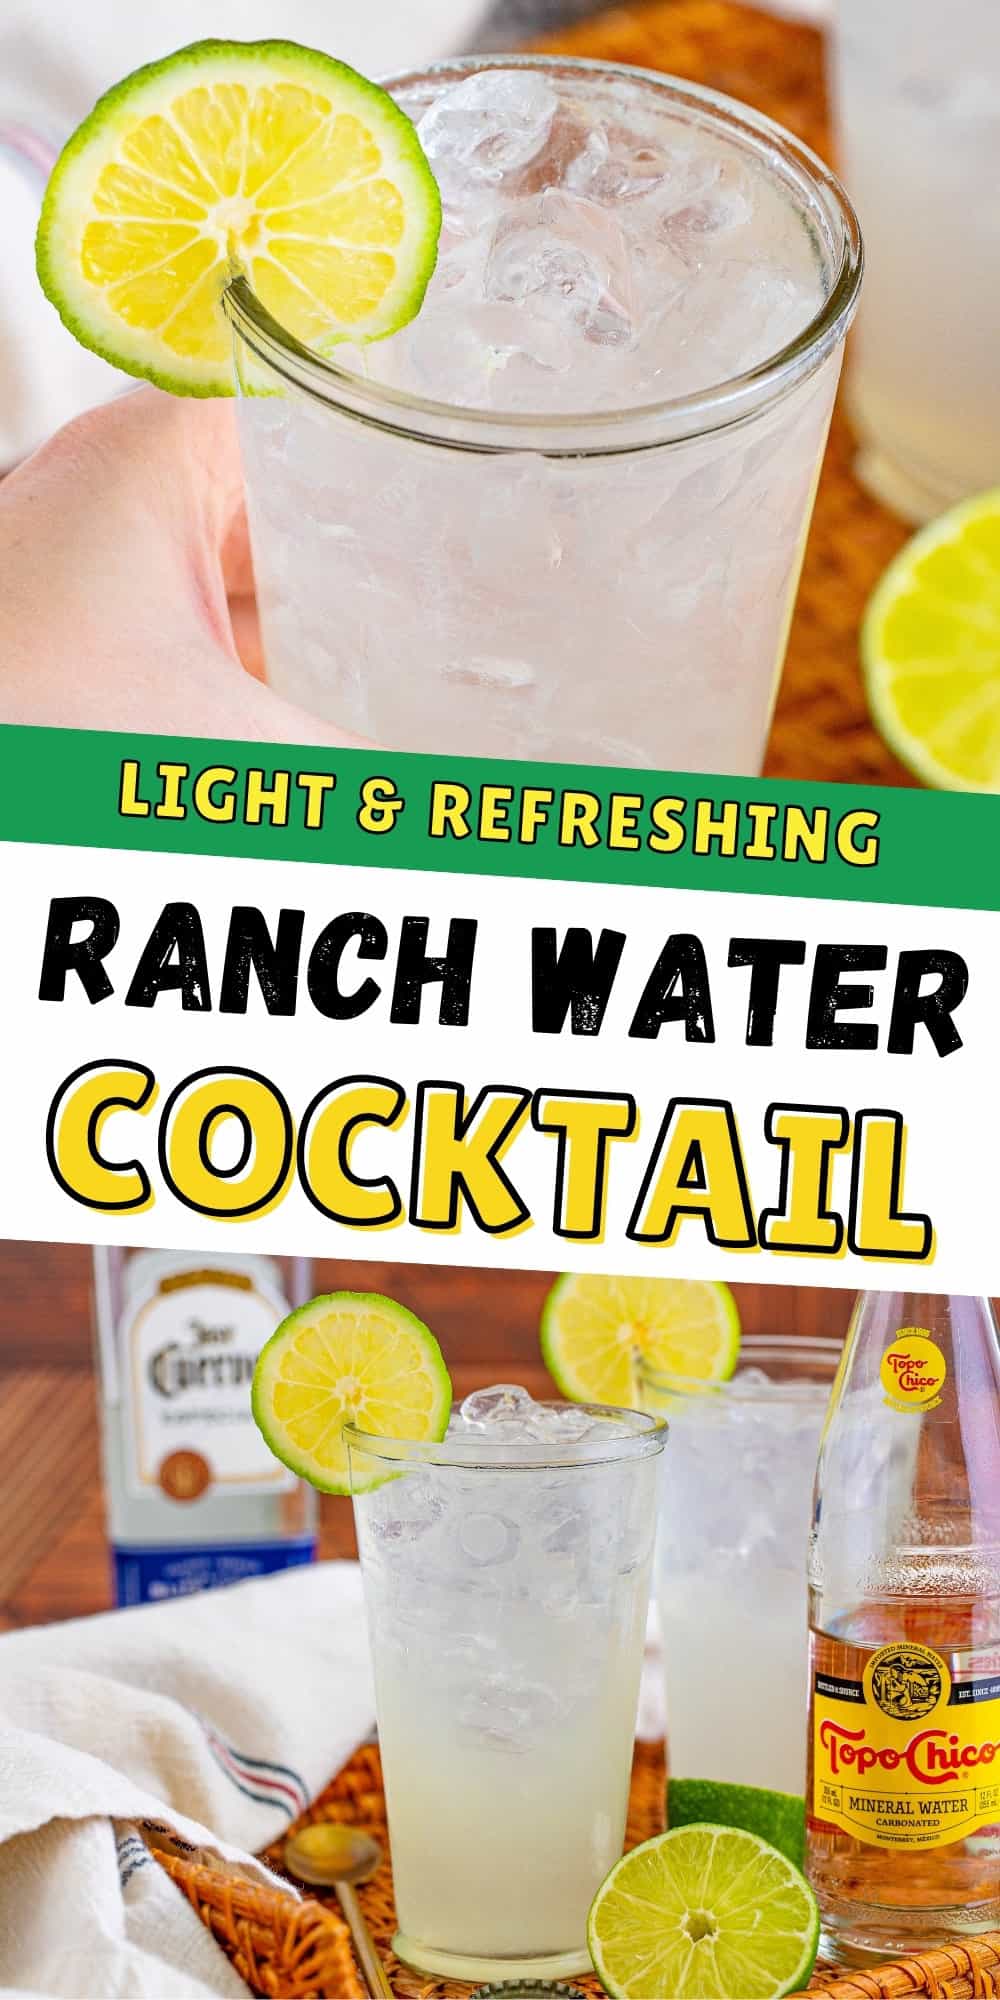 Ranch Water Cocktail.